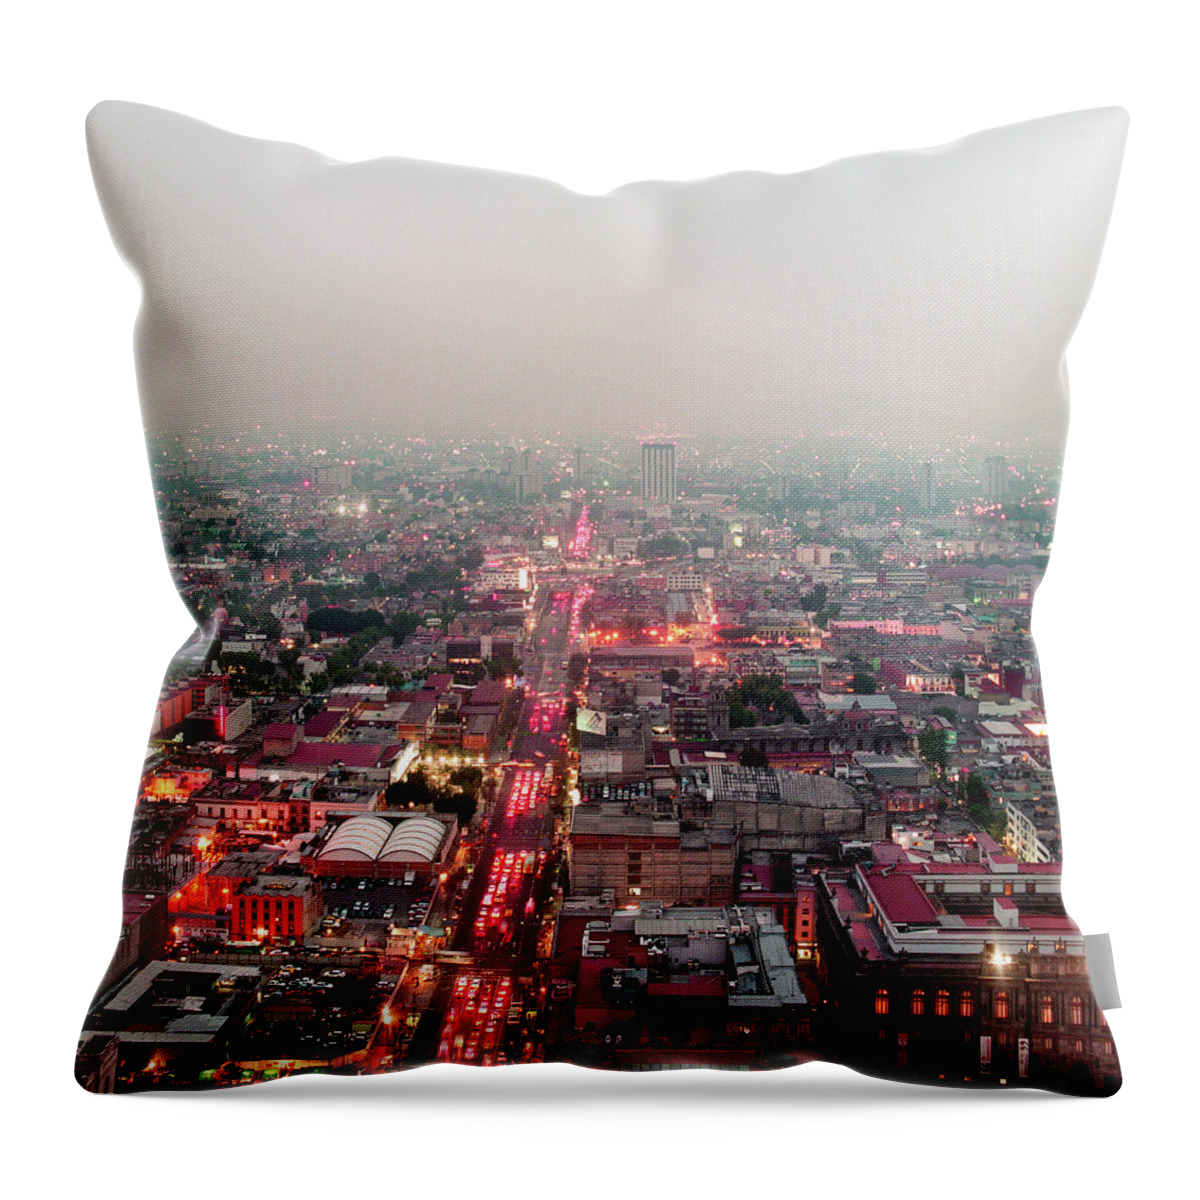 Mexico City Throw Pillow featuring the photograph Aerial View Of Mexico City by Jasper James